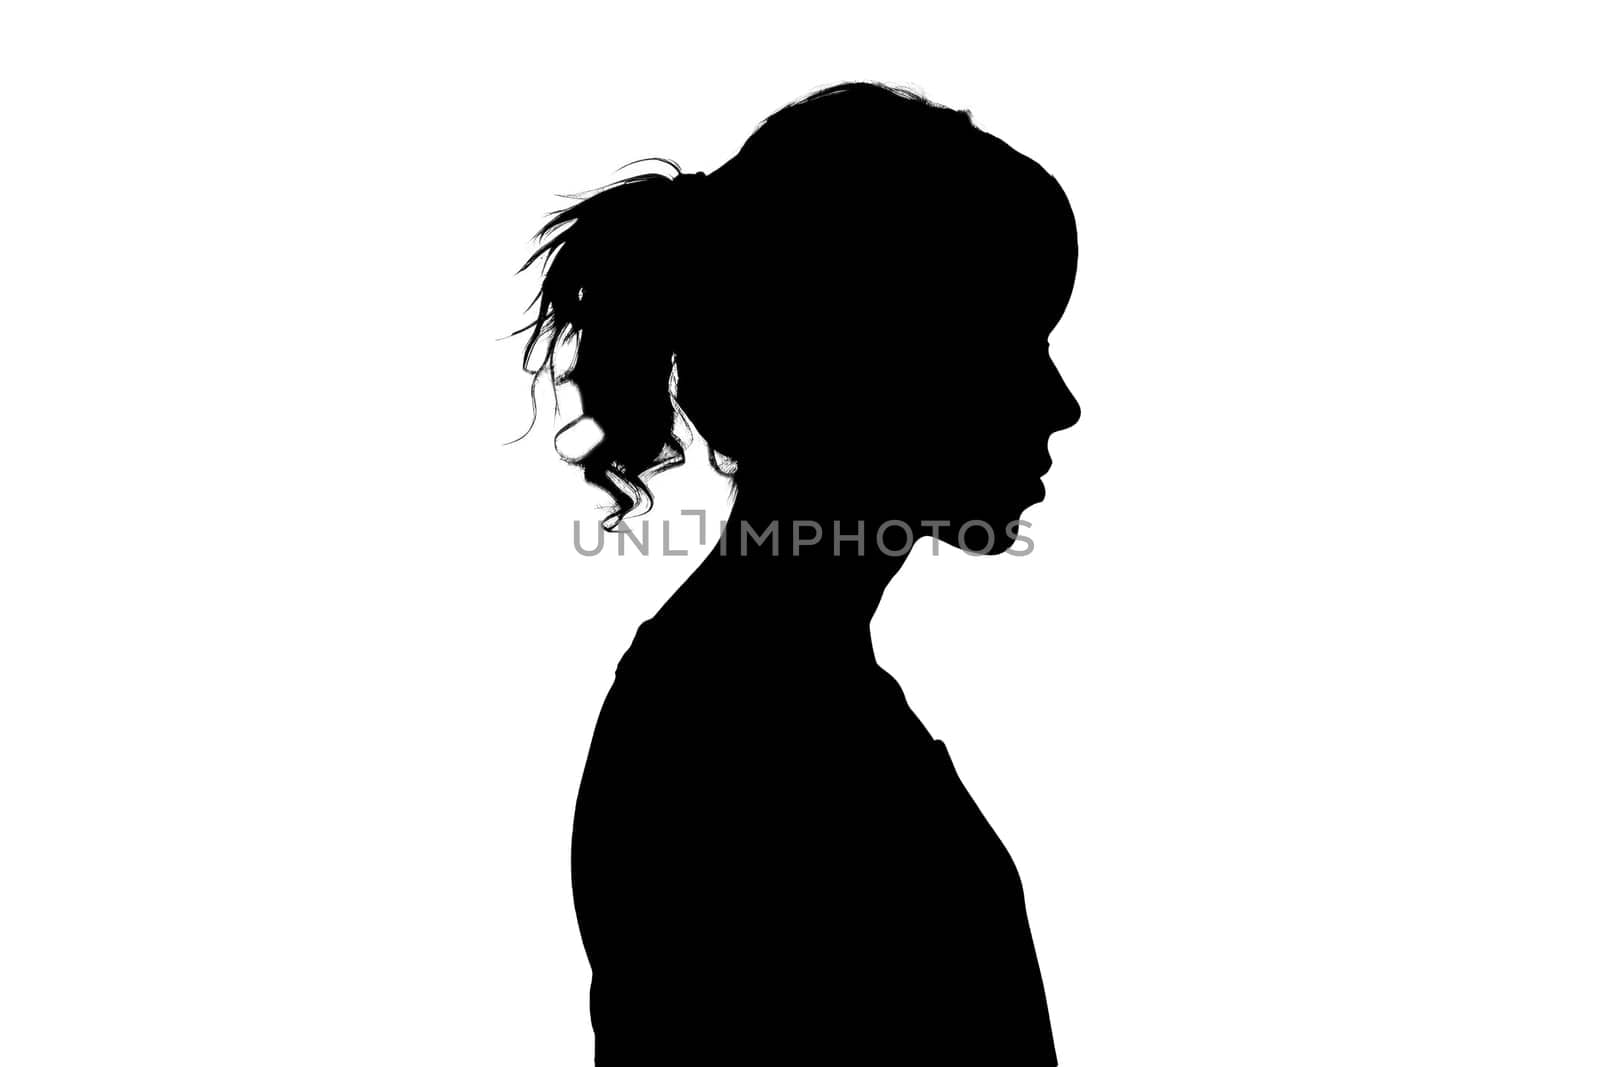 Black silhouette of an unknown person on a white background